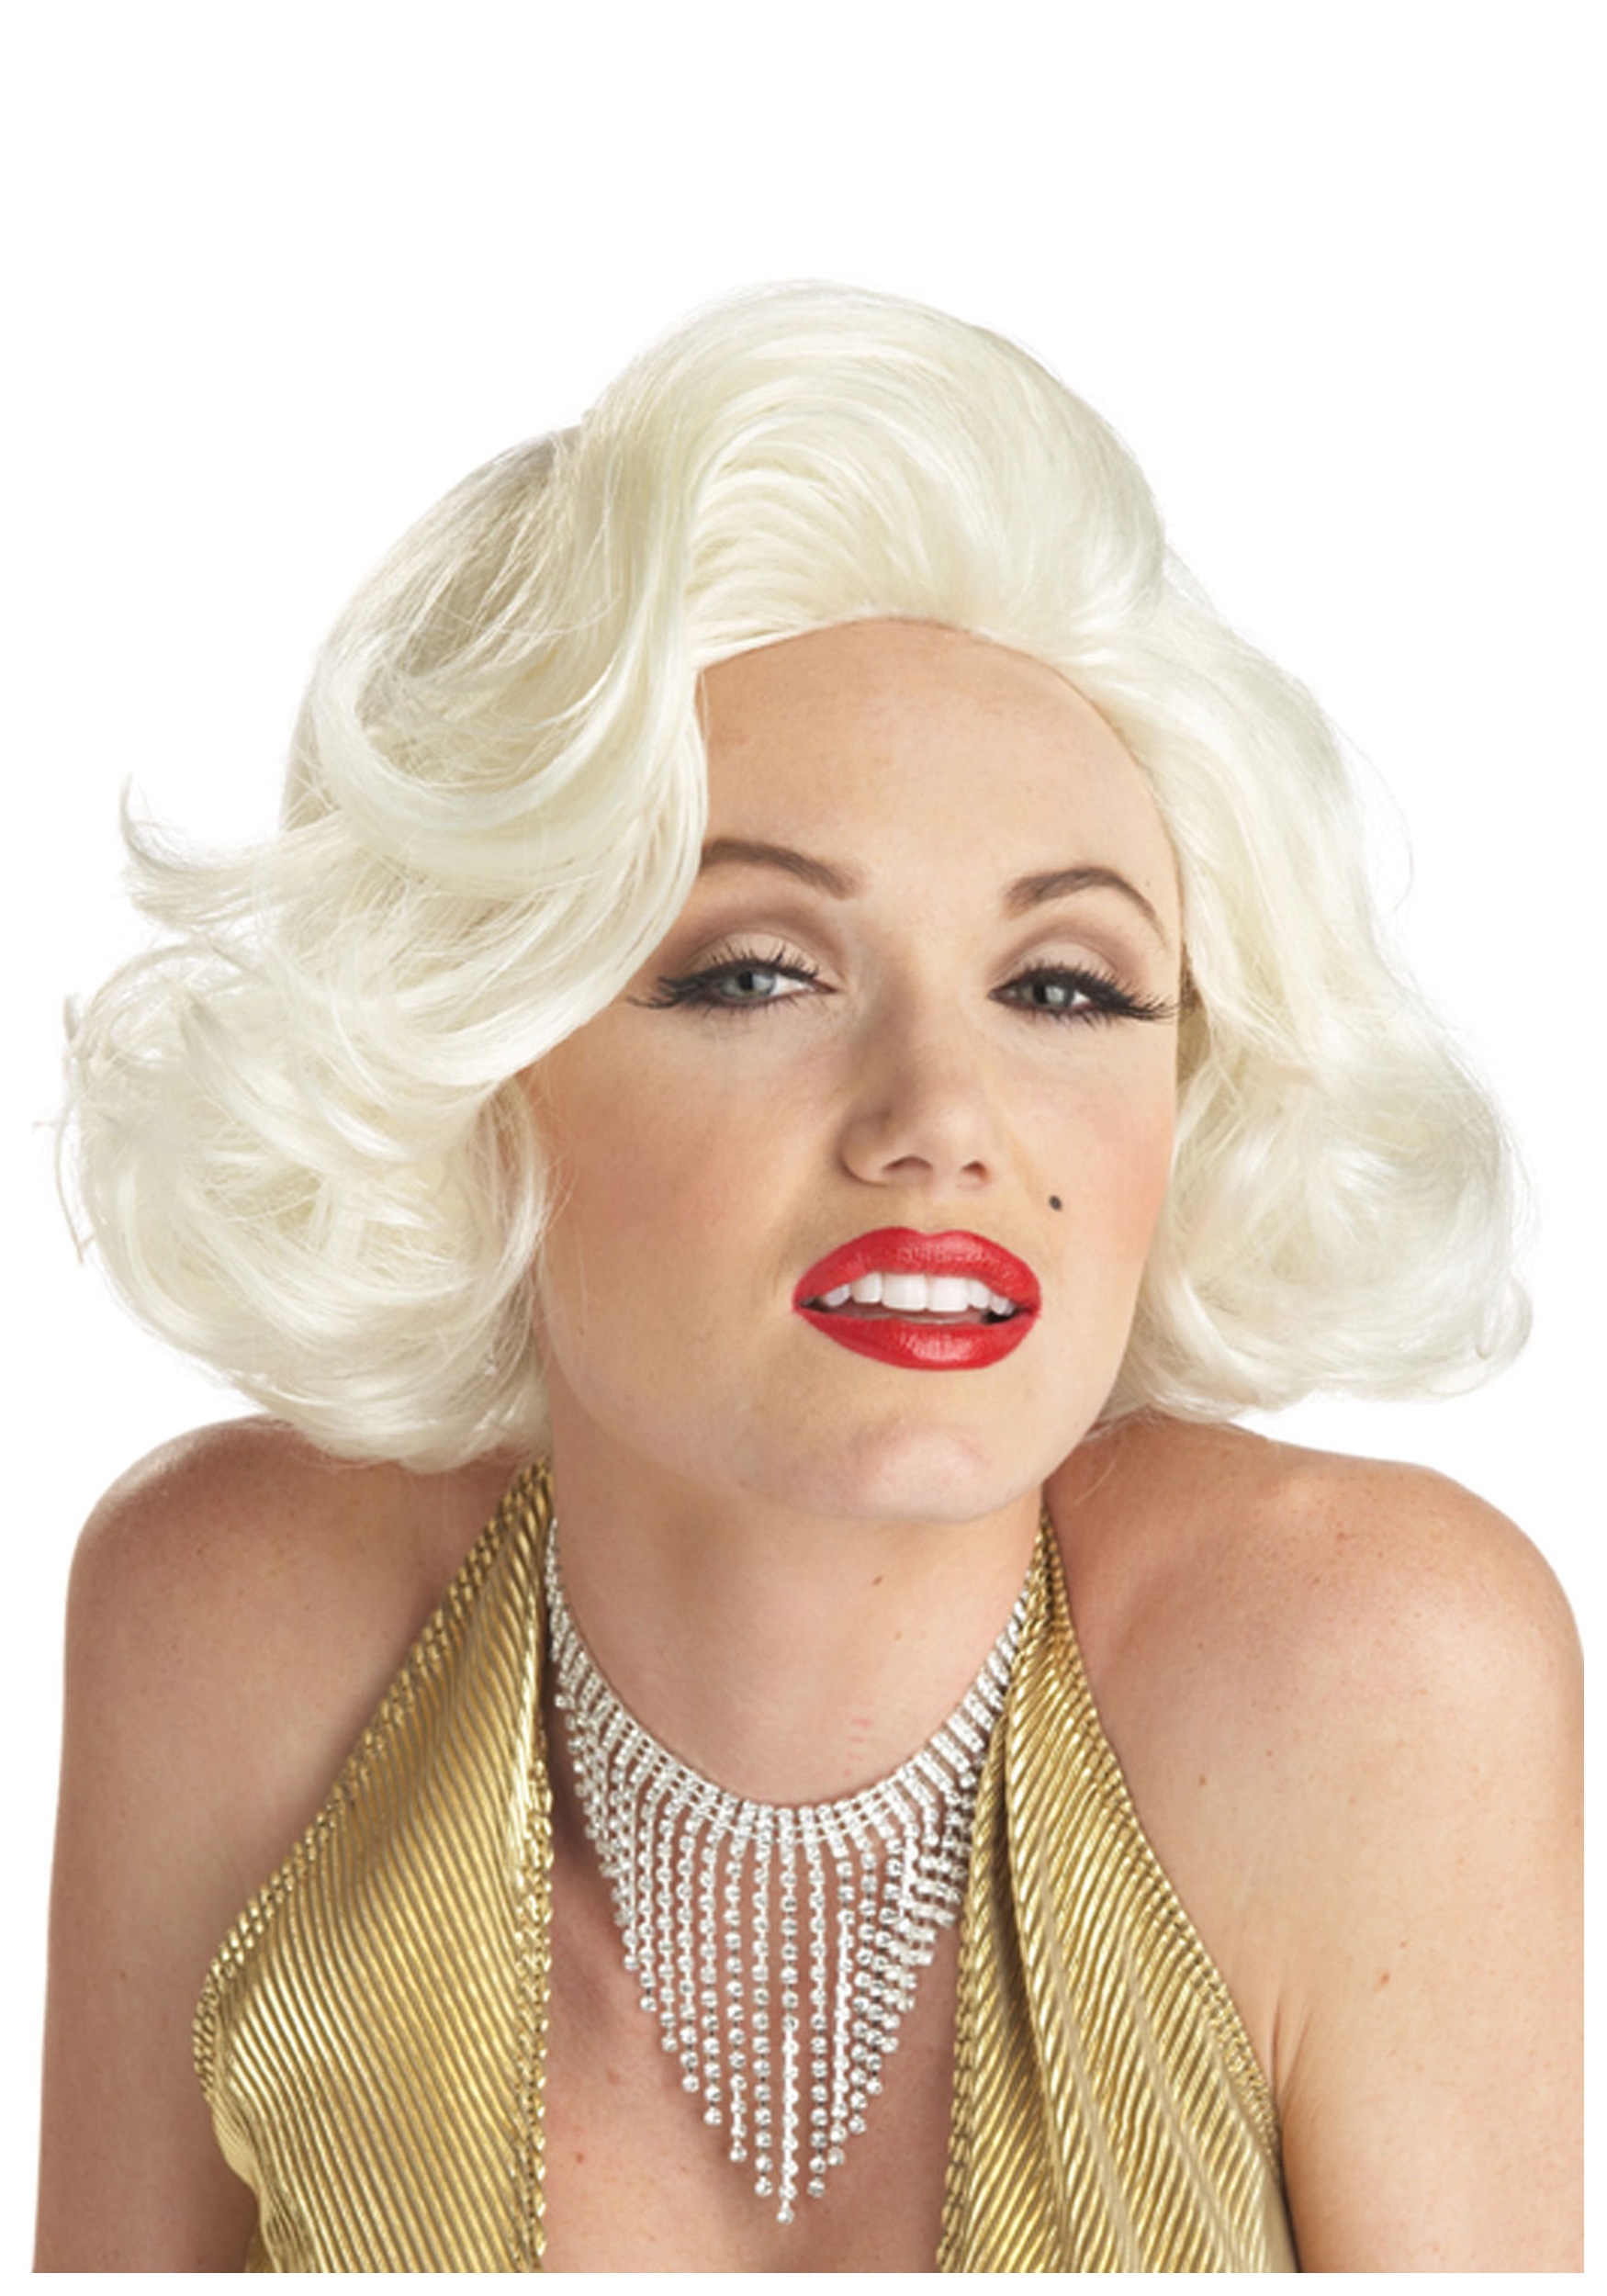 http://images.halloweencostumes.com/products/1767/1-1/classic-marilyn-costume-wig.jpg